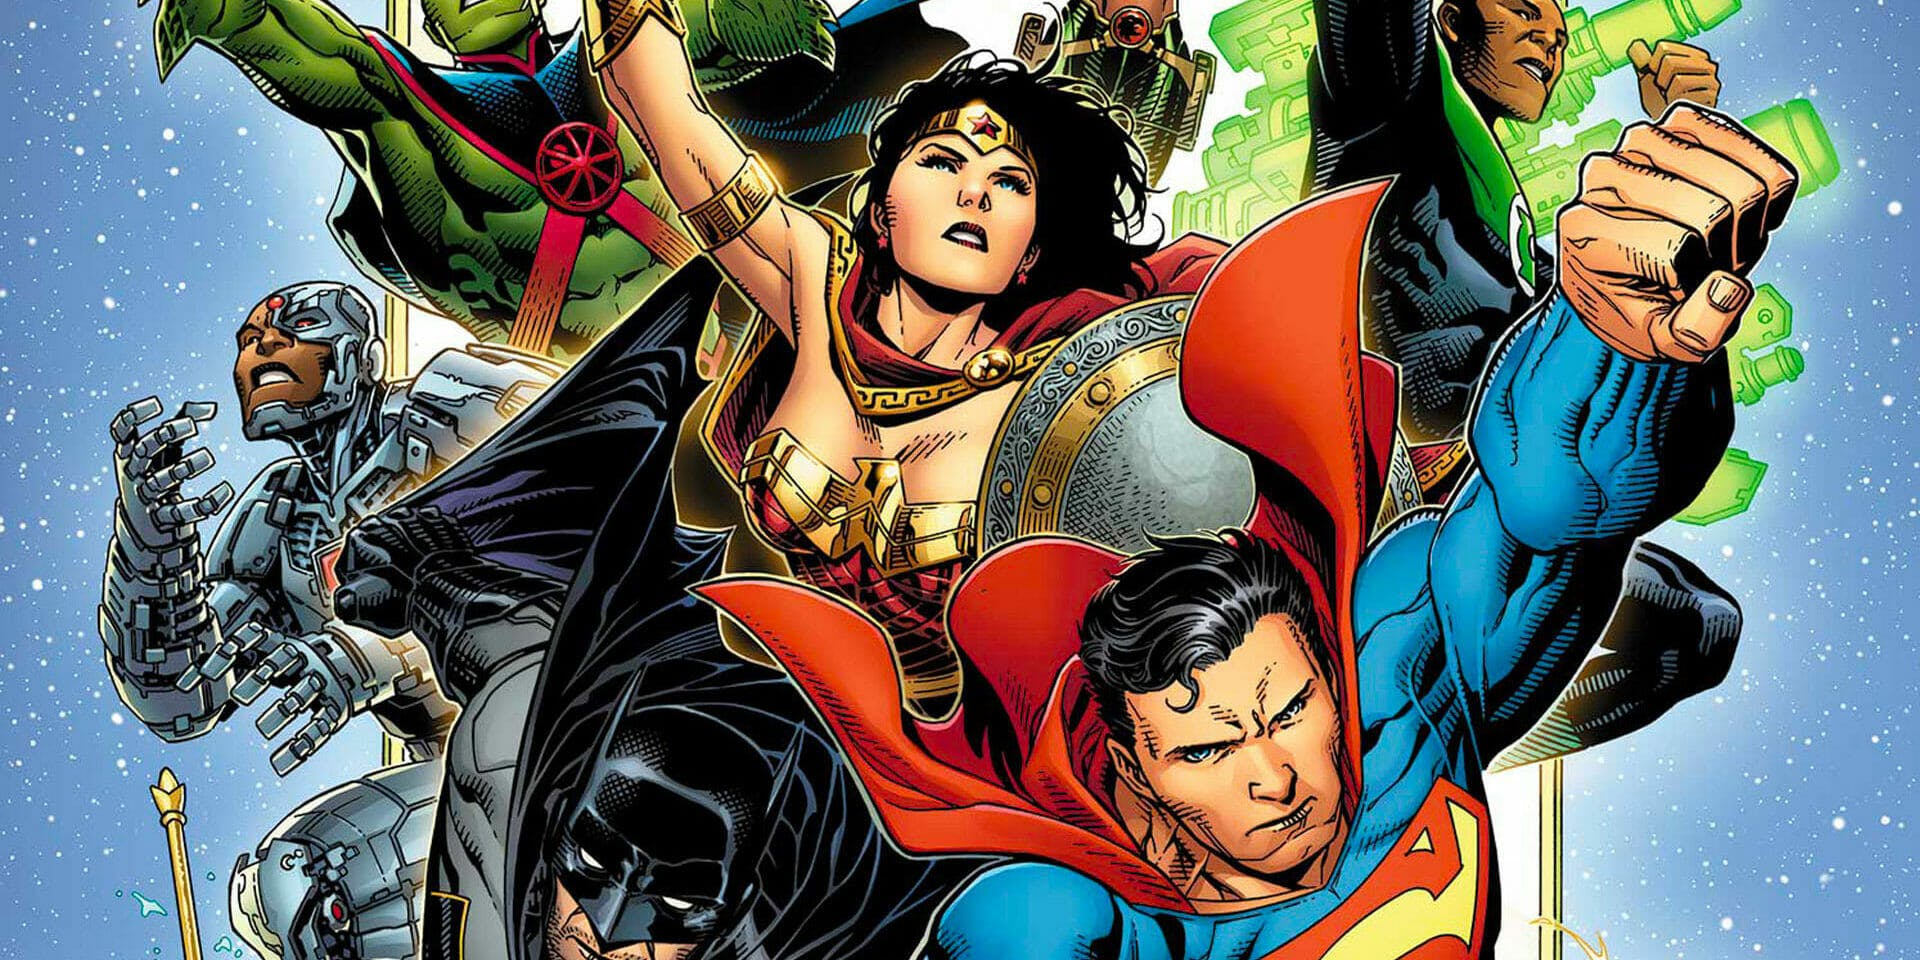 DC Heroes: The Top 20 DC Comics Superheroes of All Time